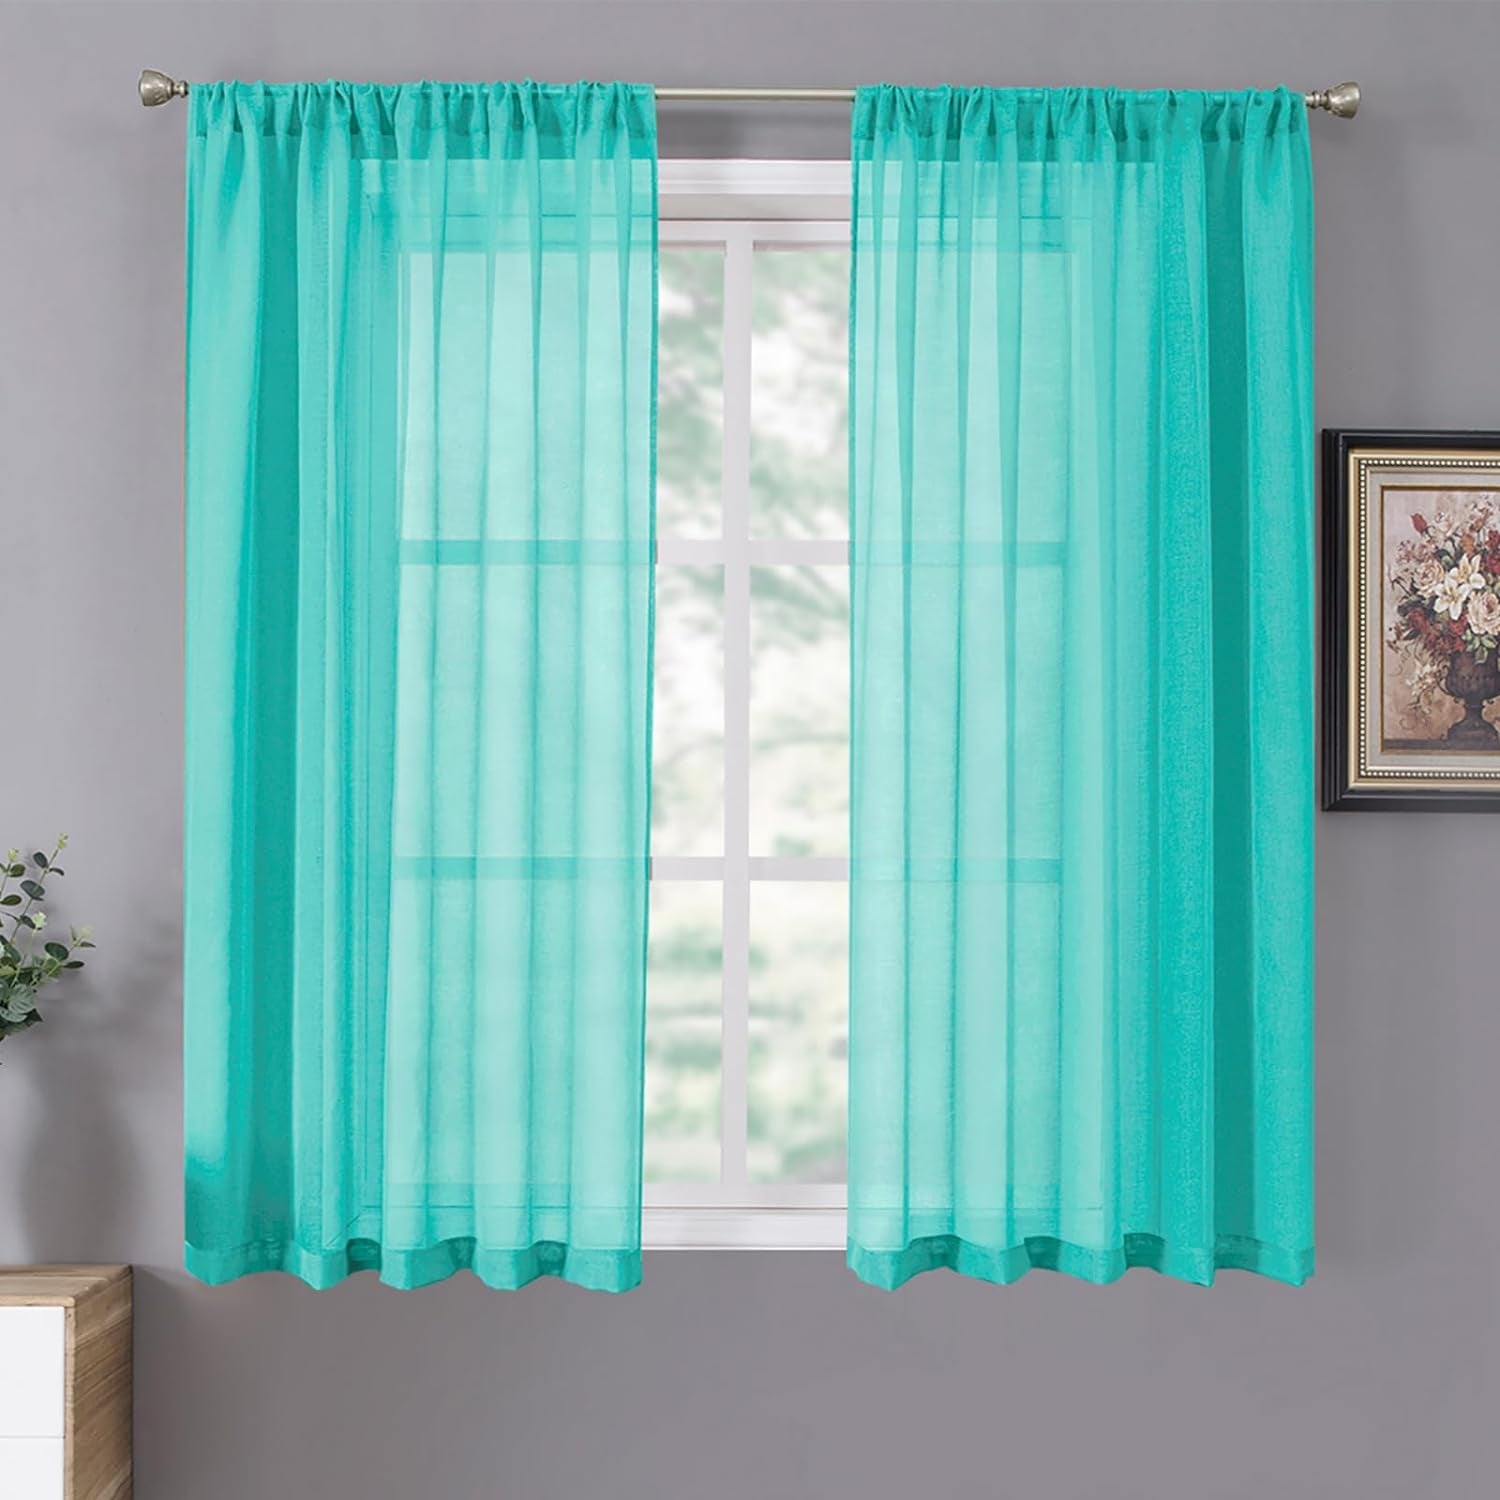 Tollpiz Short Sheer Curtains Linen Textured Bedroom Curtain Sheers Light Filtering Rod Pocket Voile Curtains for Living Room, 54 X 45 Inches Long, White, Set of 2 Panels  Tollpiz Tex Aqua Blue 42"W X 54"L 